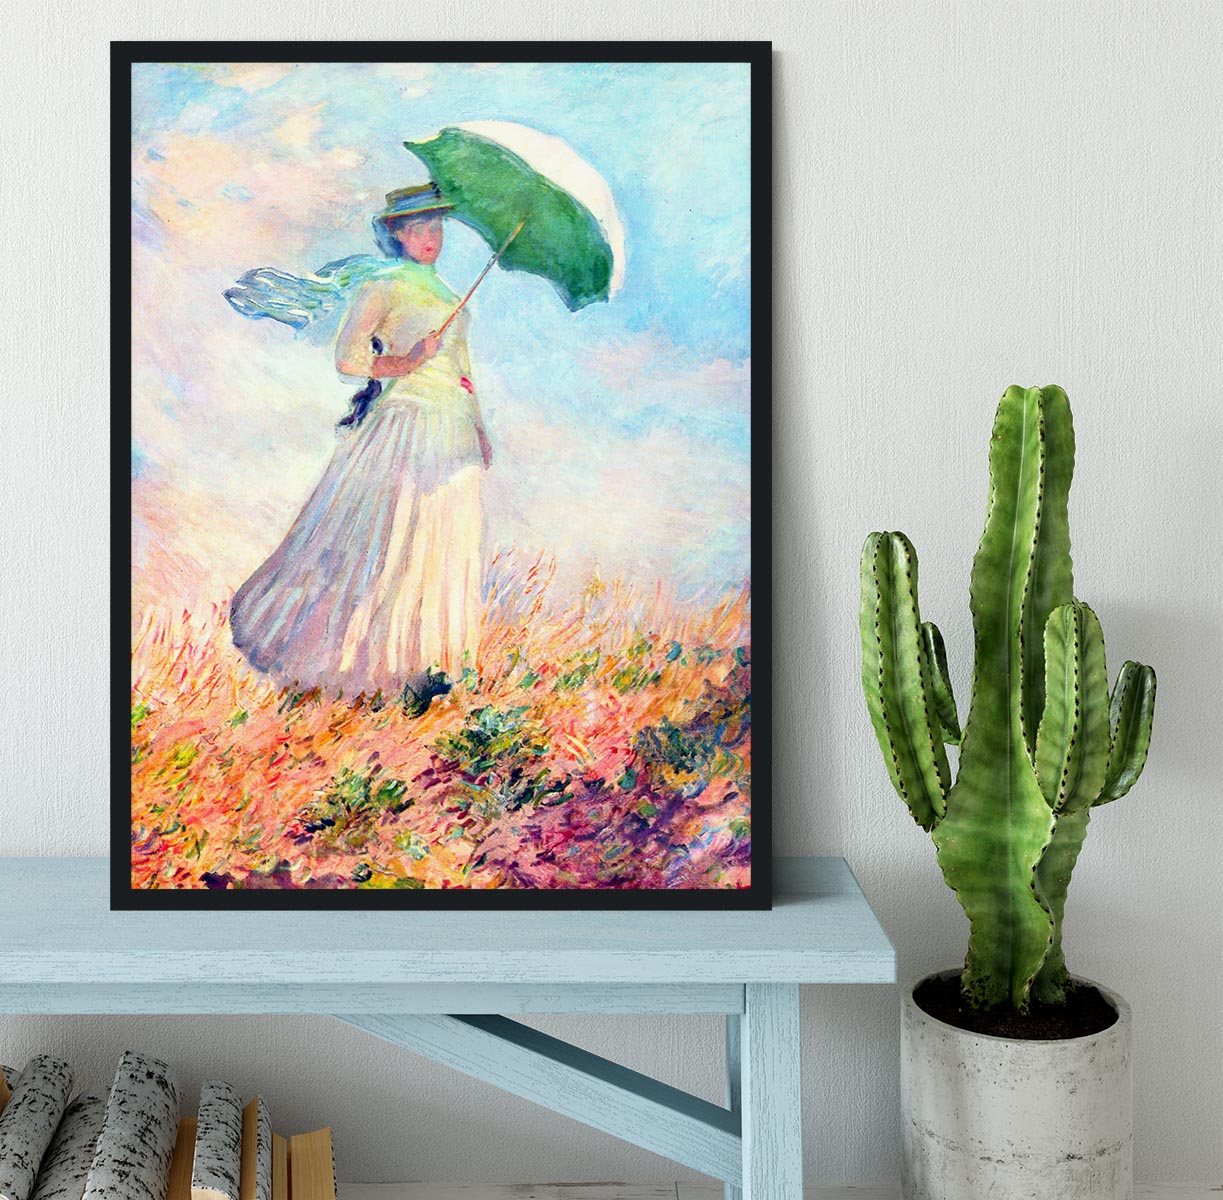 Lady with sunshade study by Monet Framed Print - Canvas Art Rocks - 2